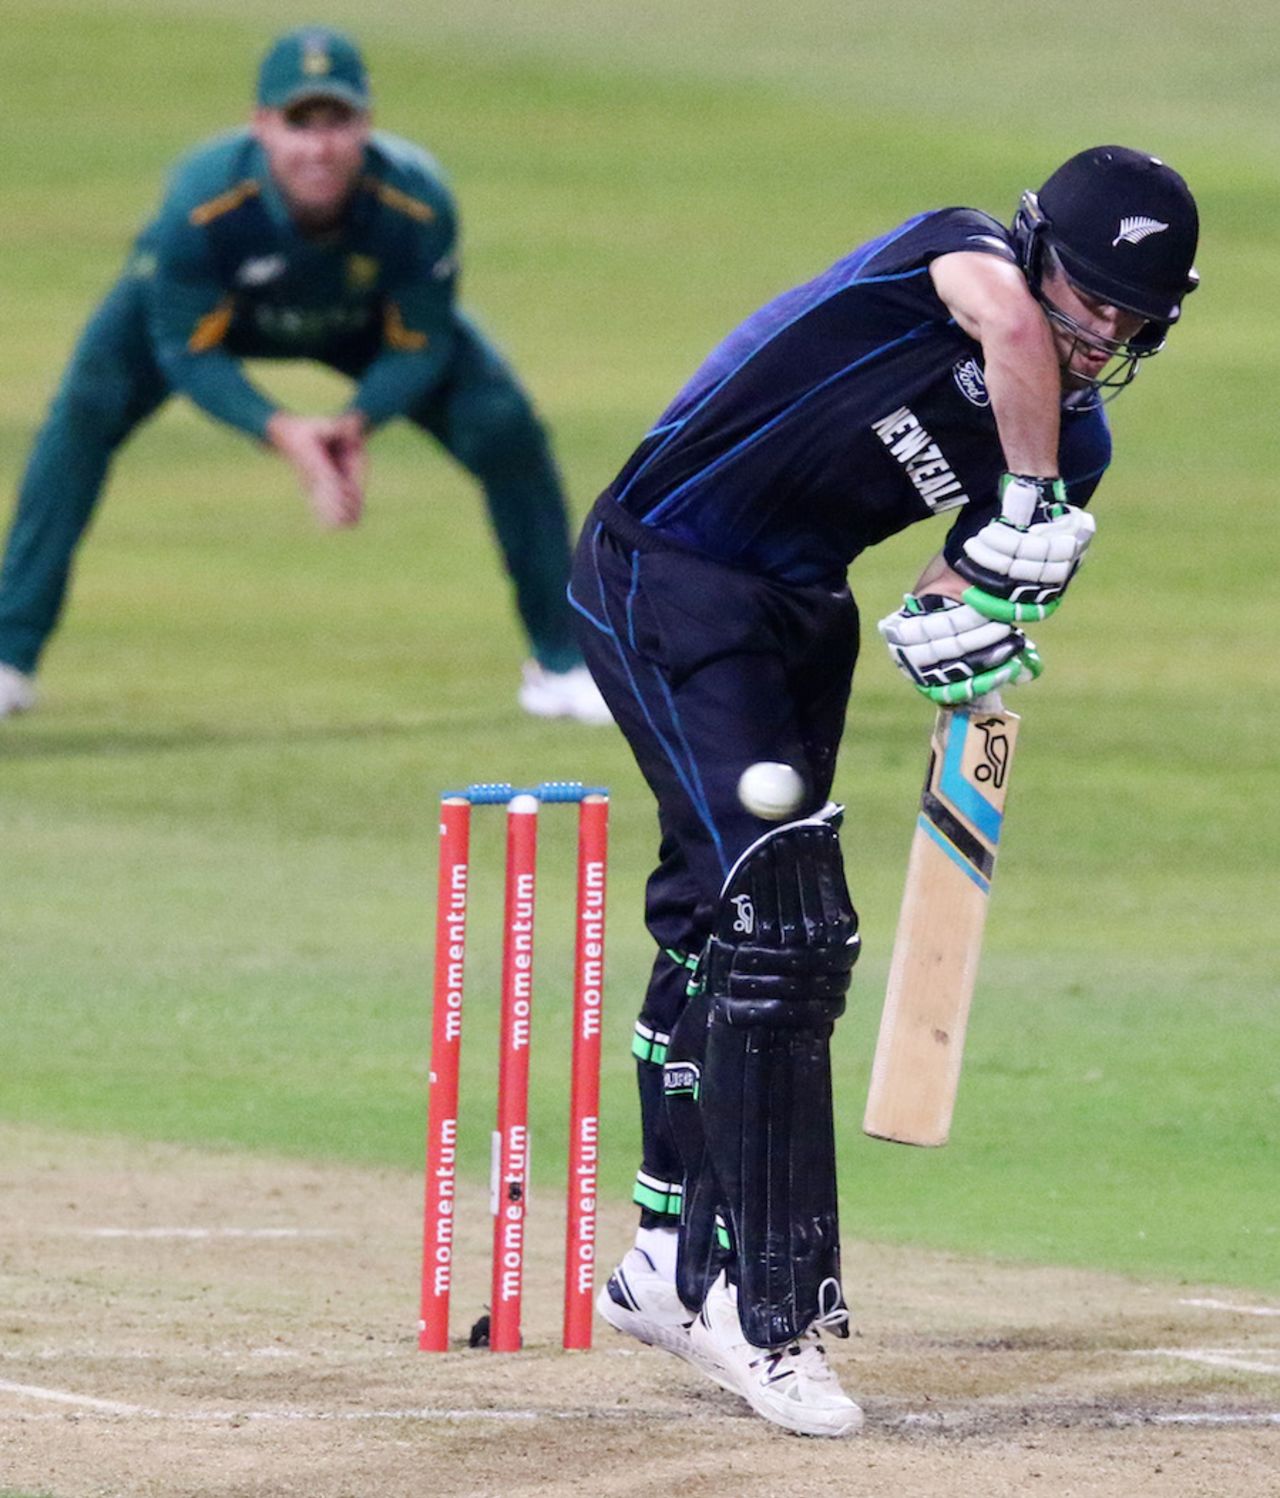 George Worker could not capitalise on his brisk start, South Africa v New Zealand, 3rd ODI, Durban, August 26, 2015